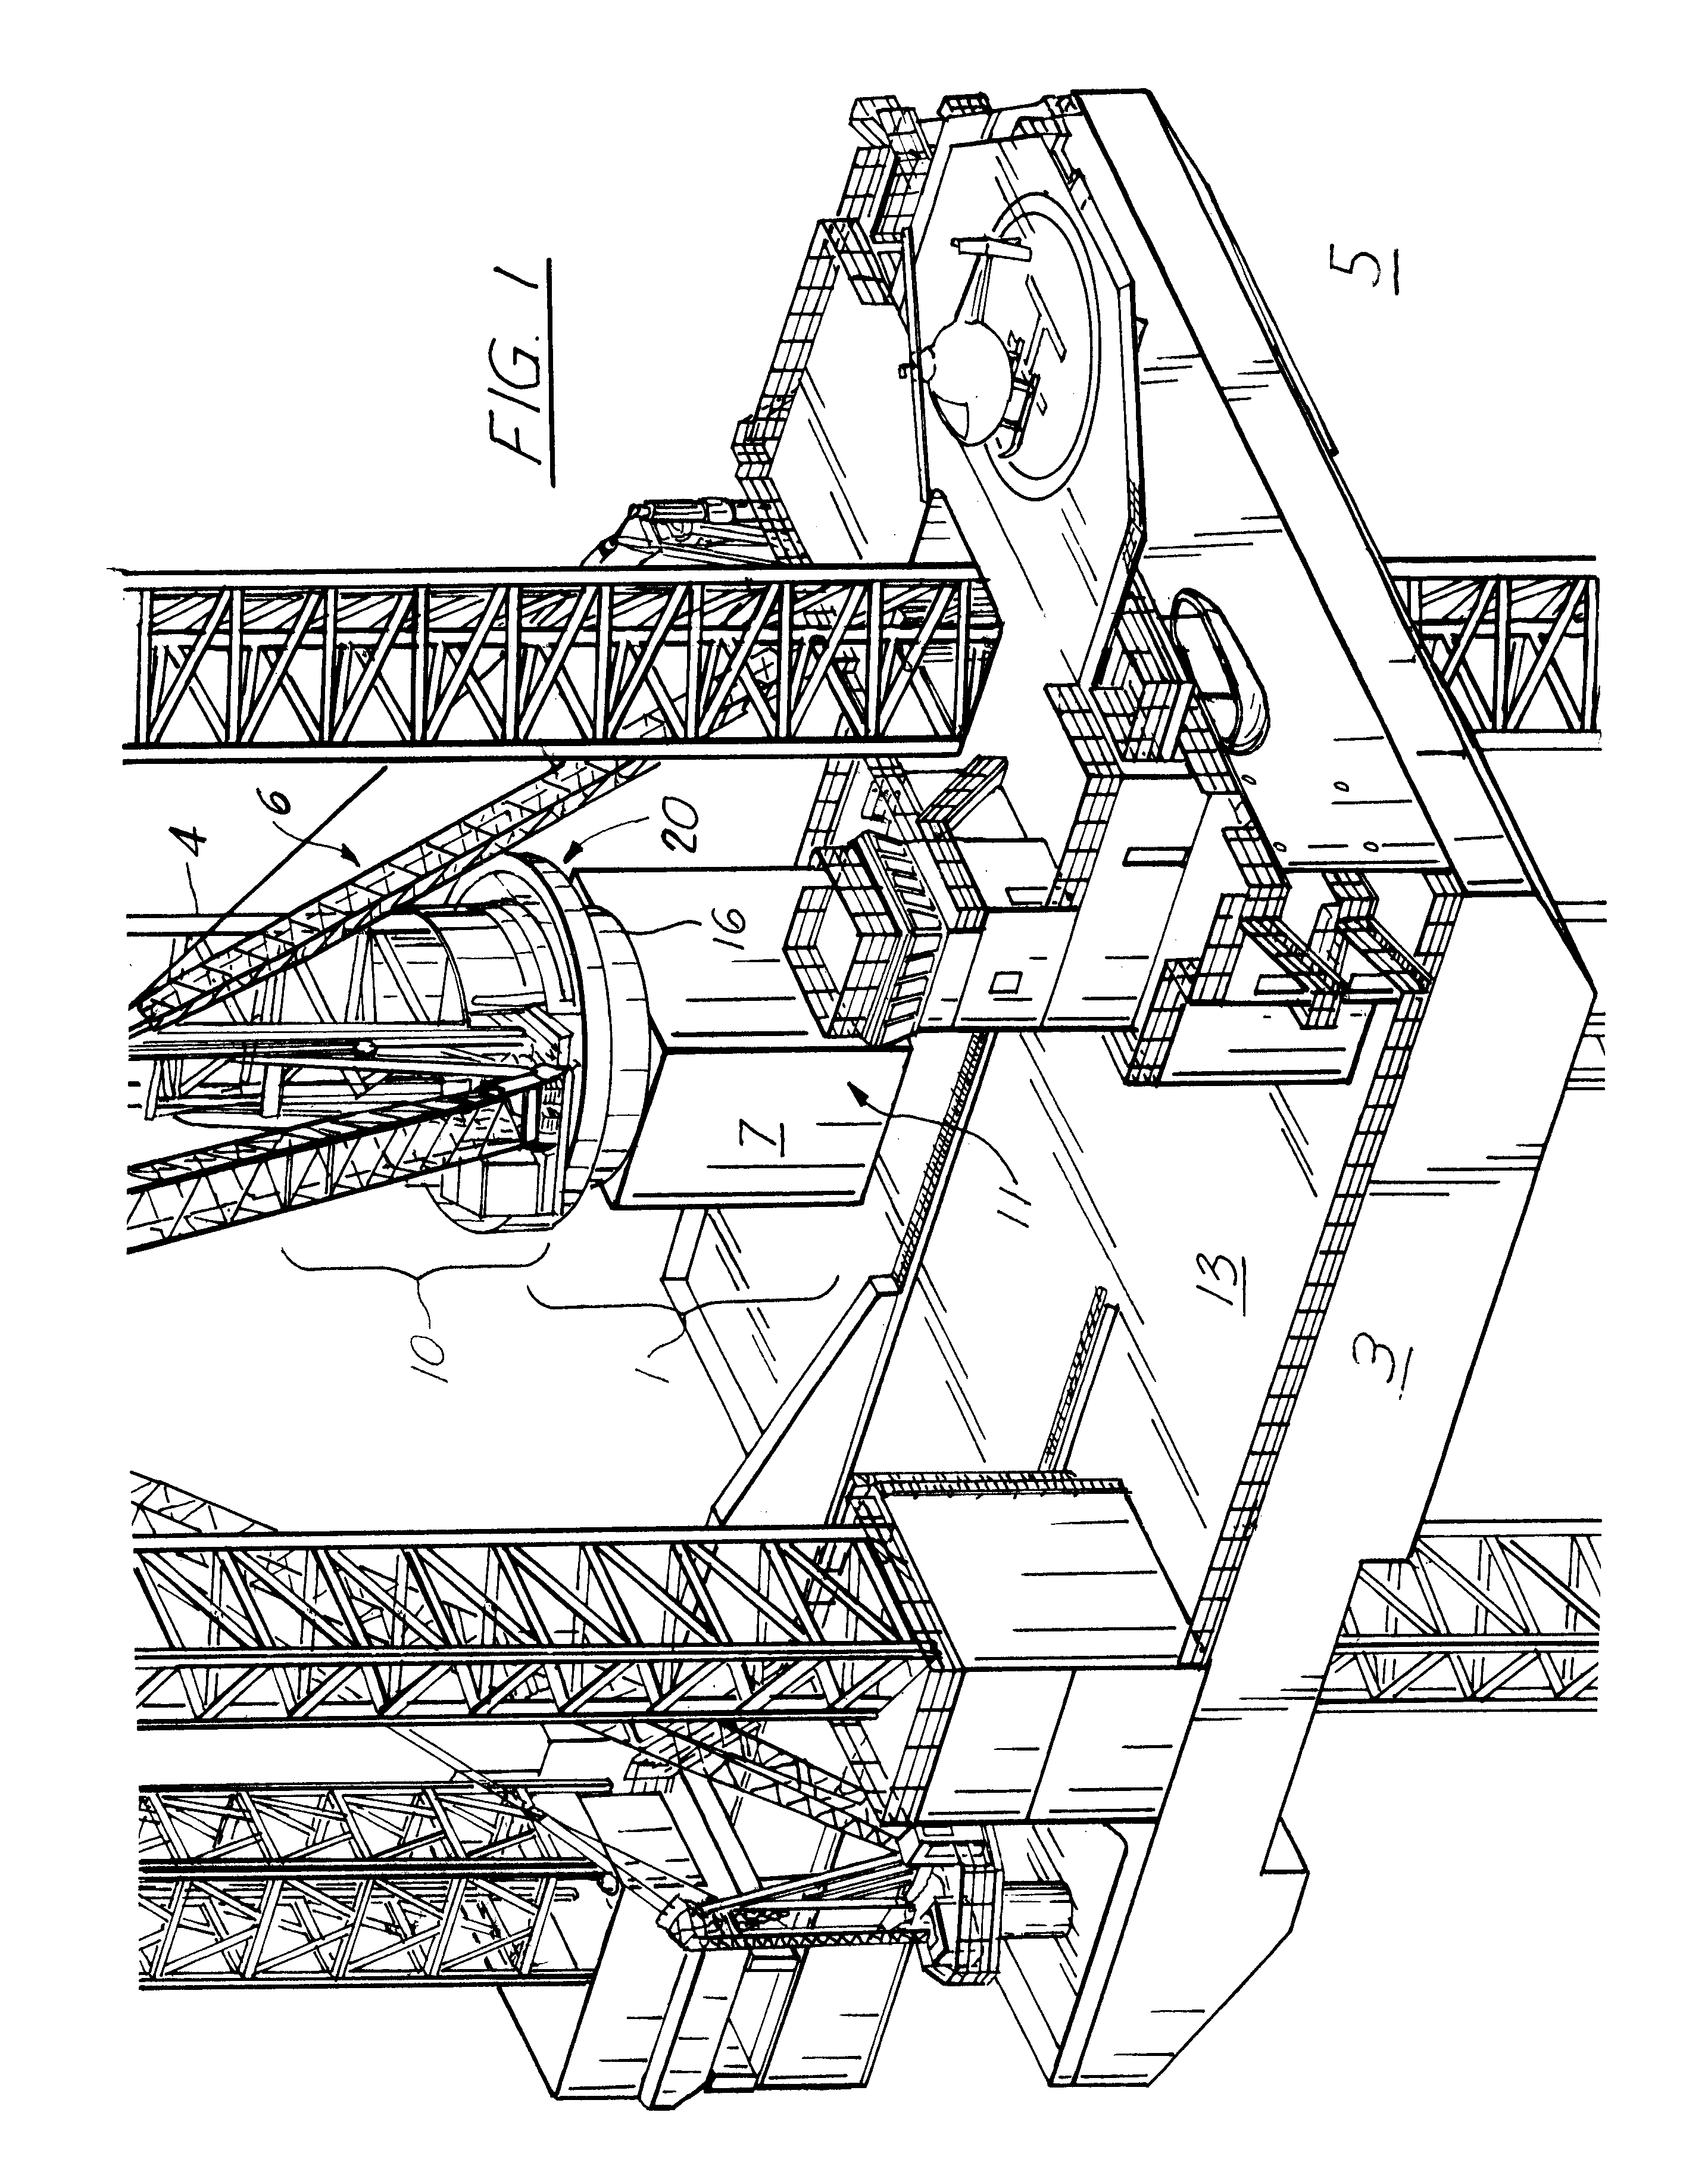 Elevated crane support system and method for elevating a lifting apparatus